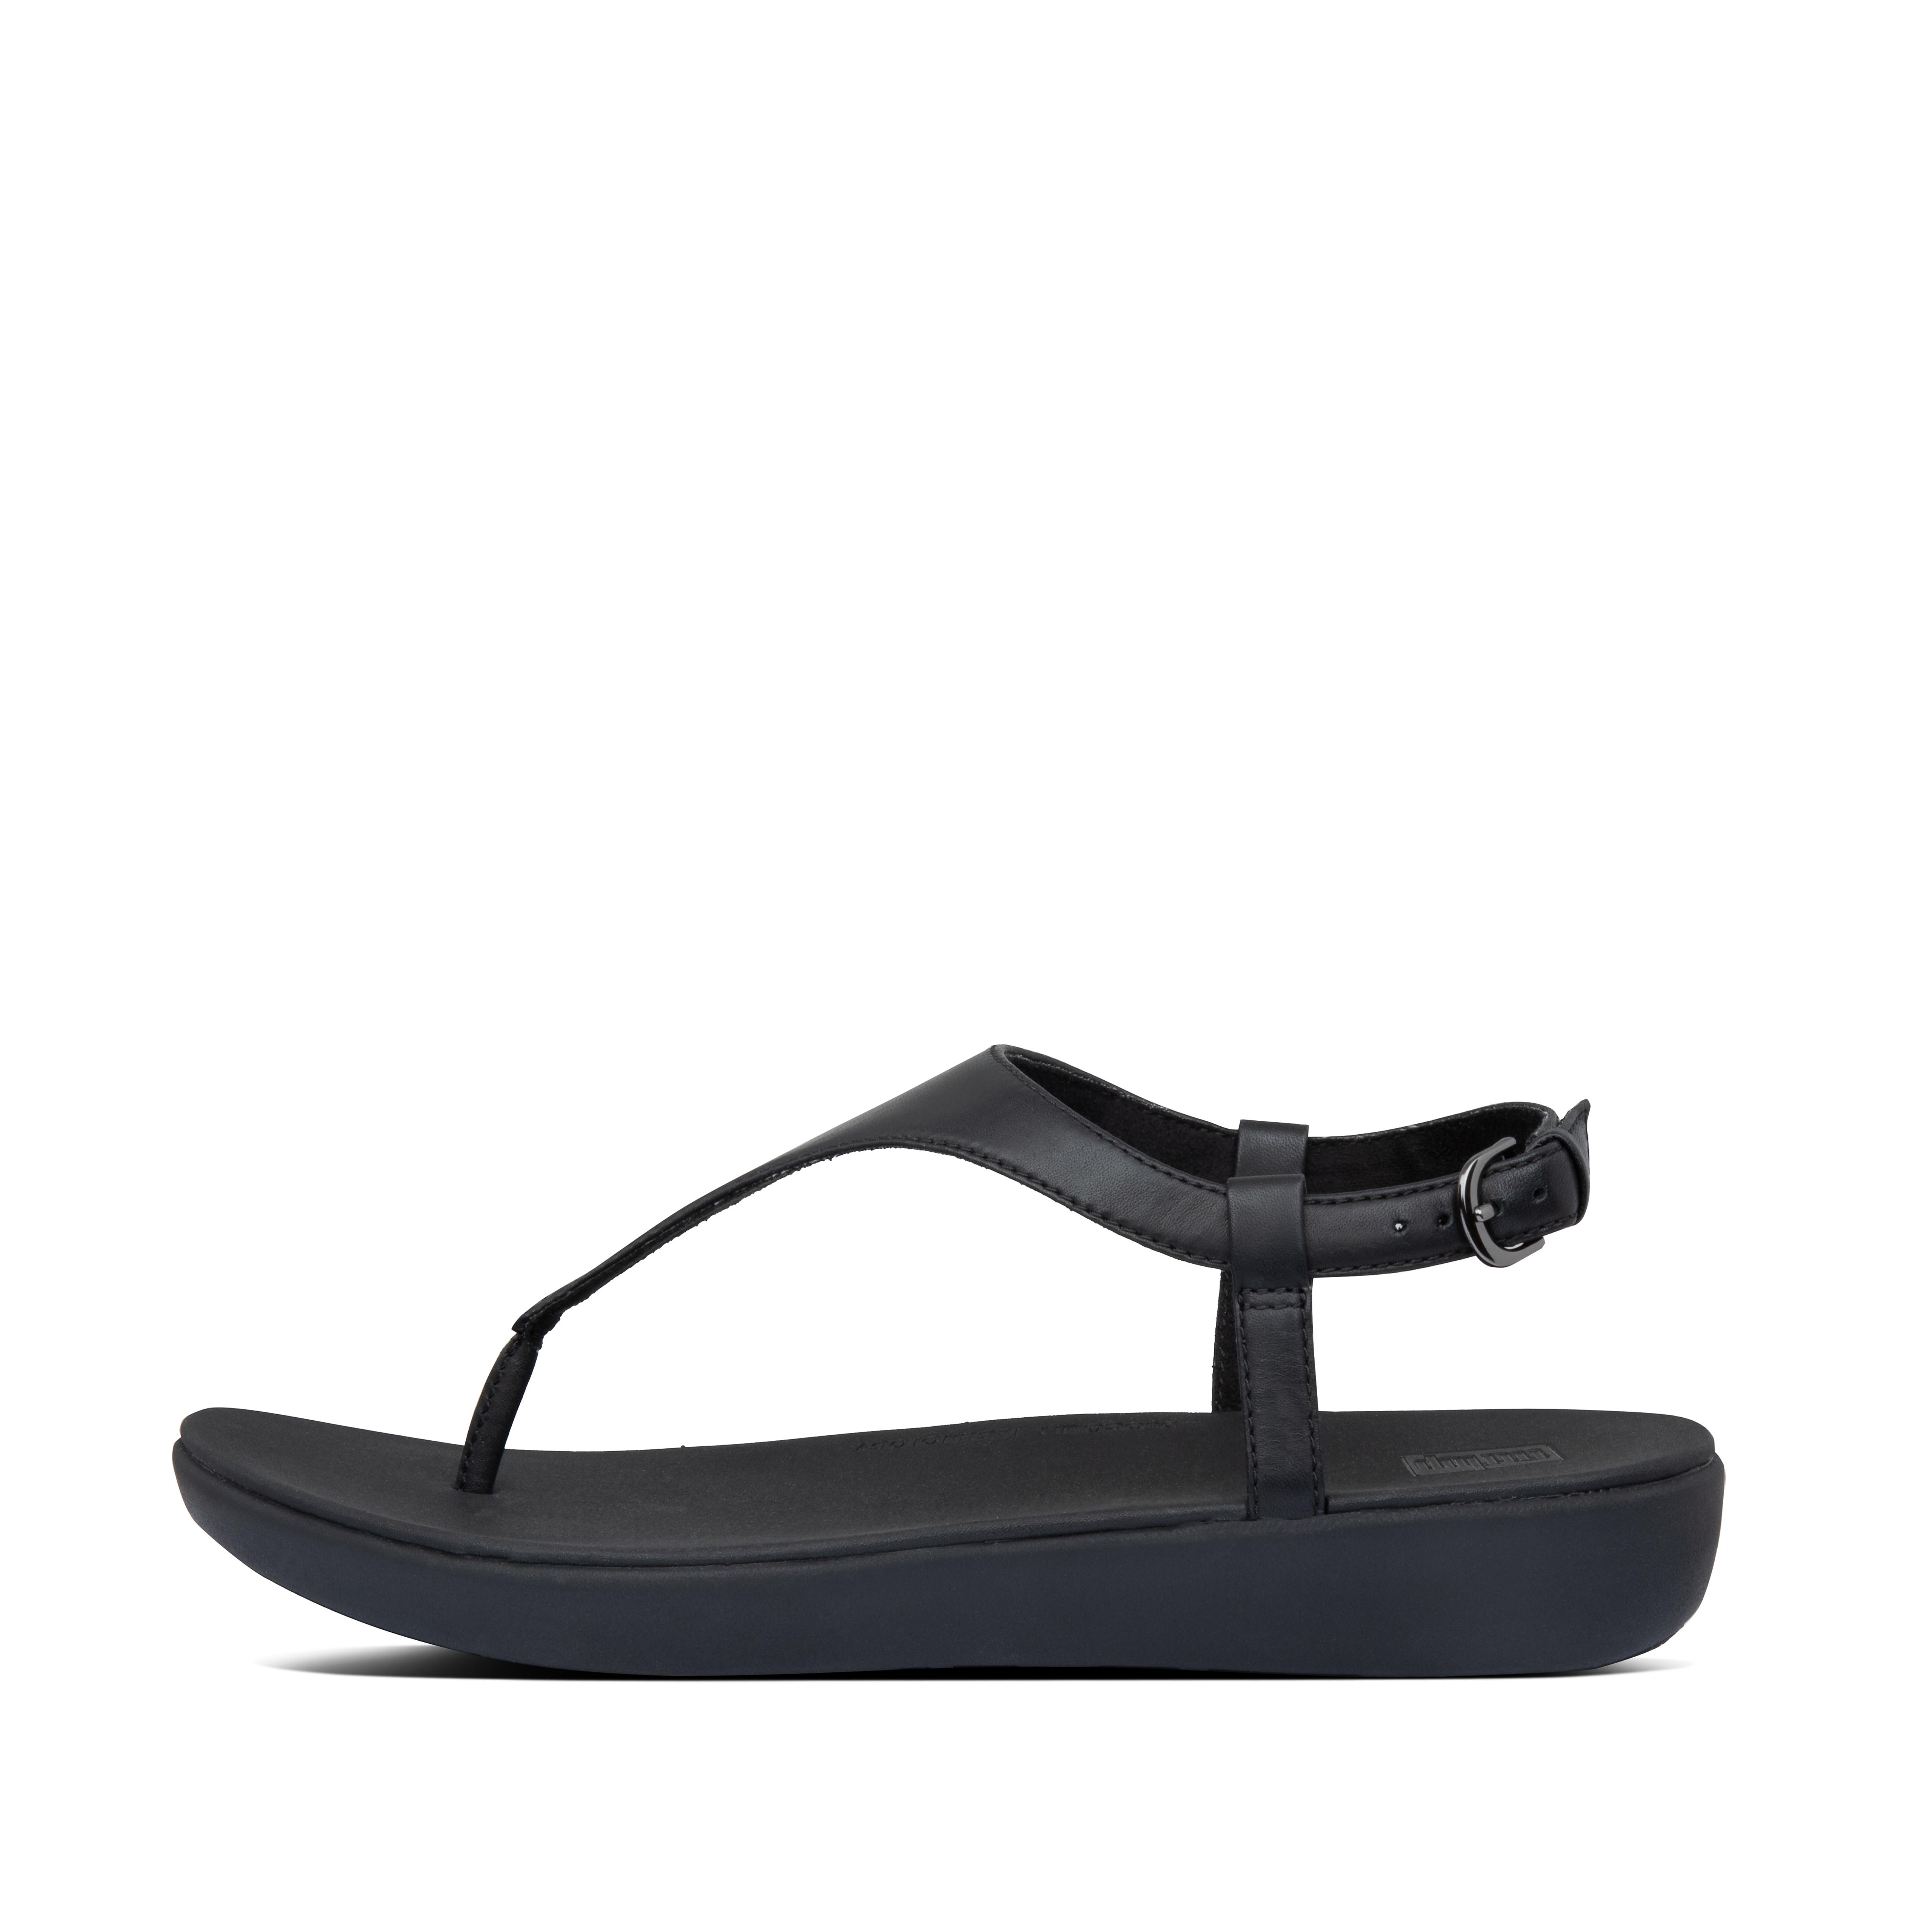 sandals without back strap